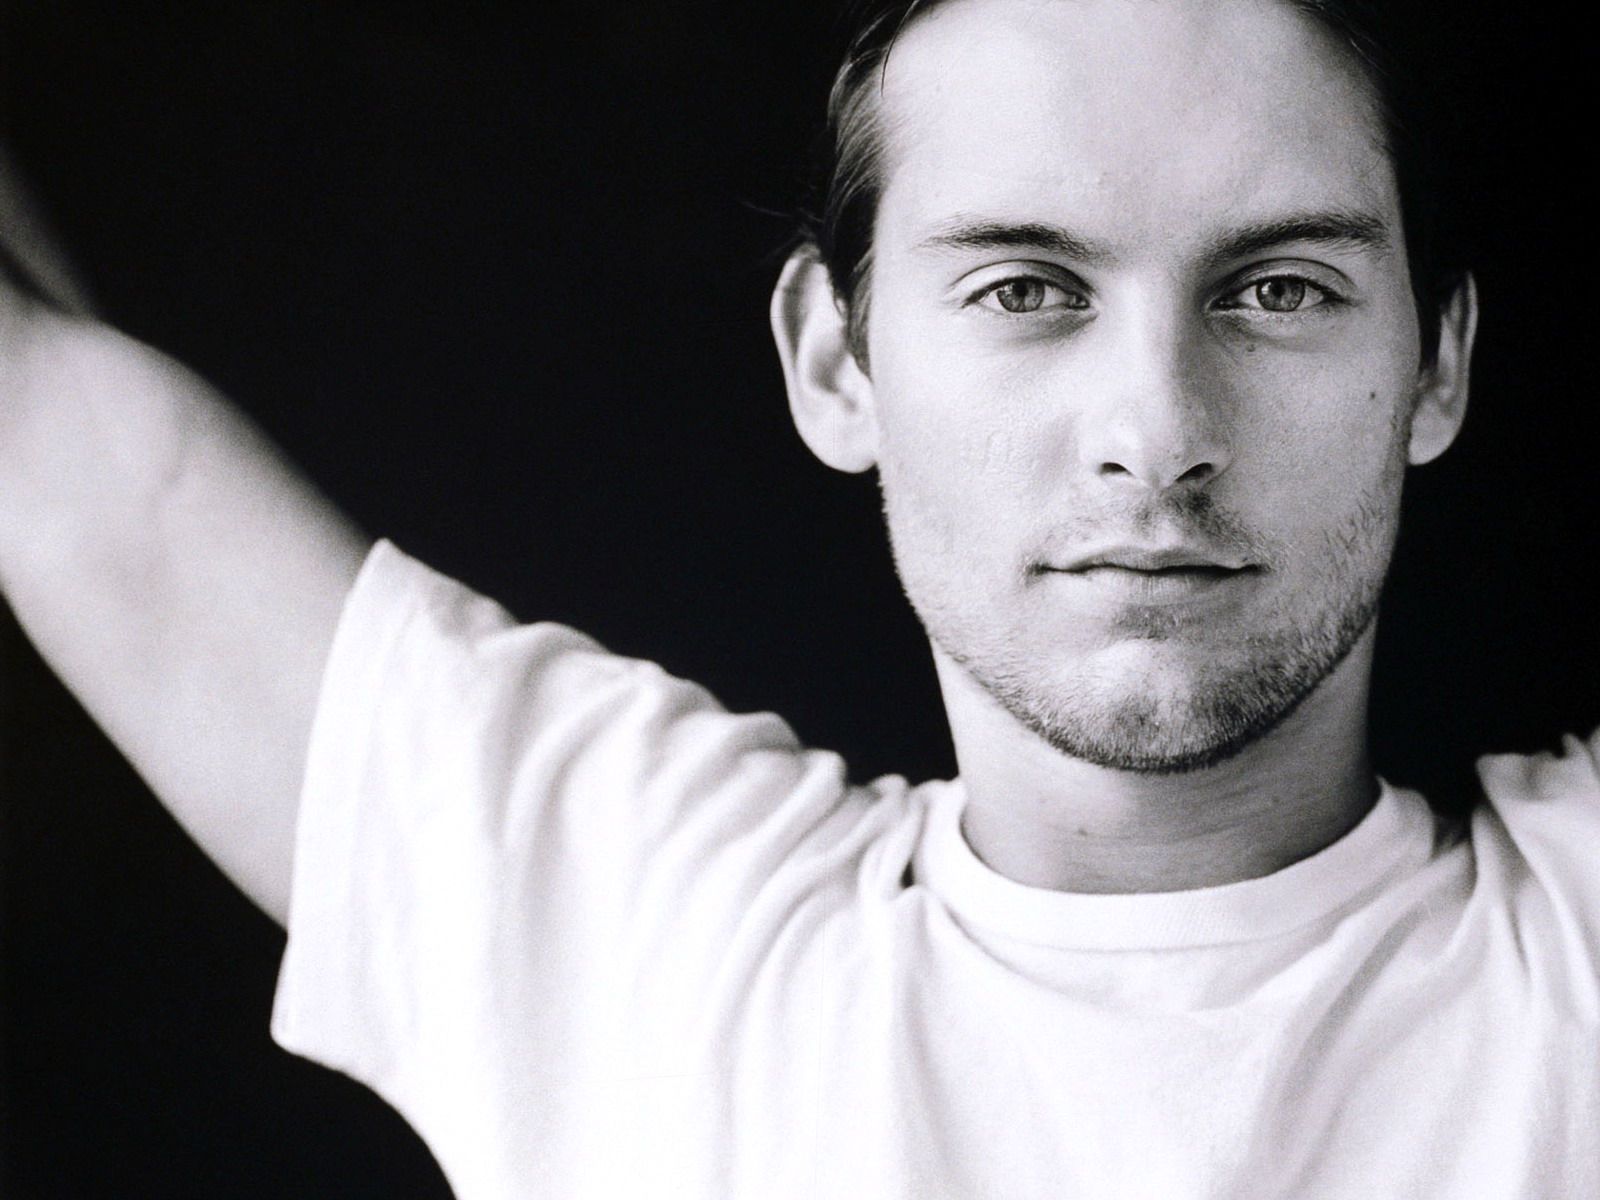 Tobey Maguire Wallpaper X